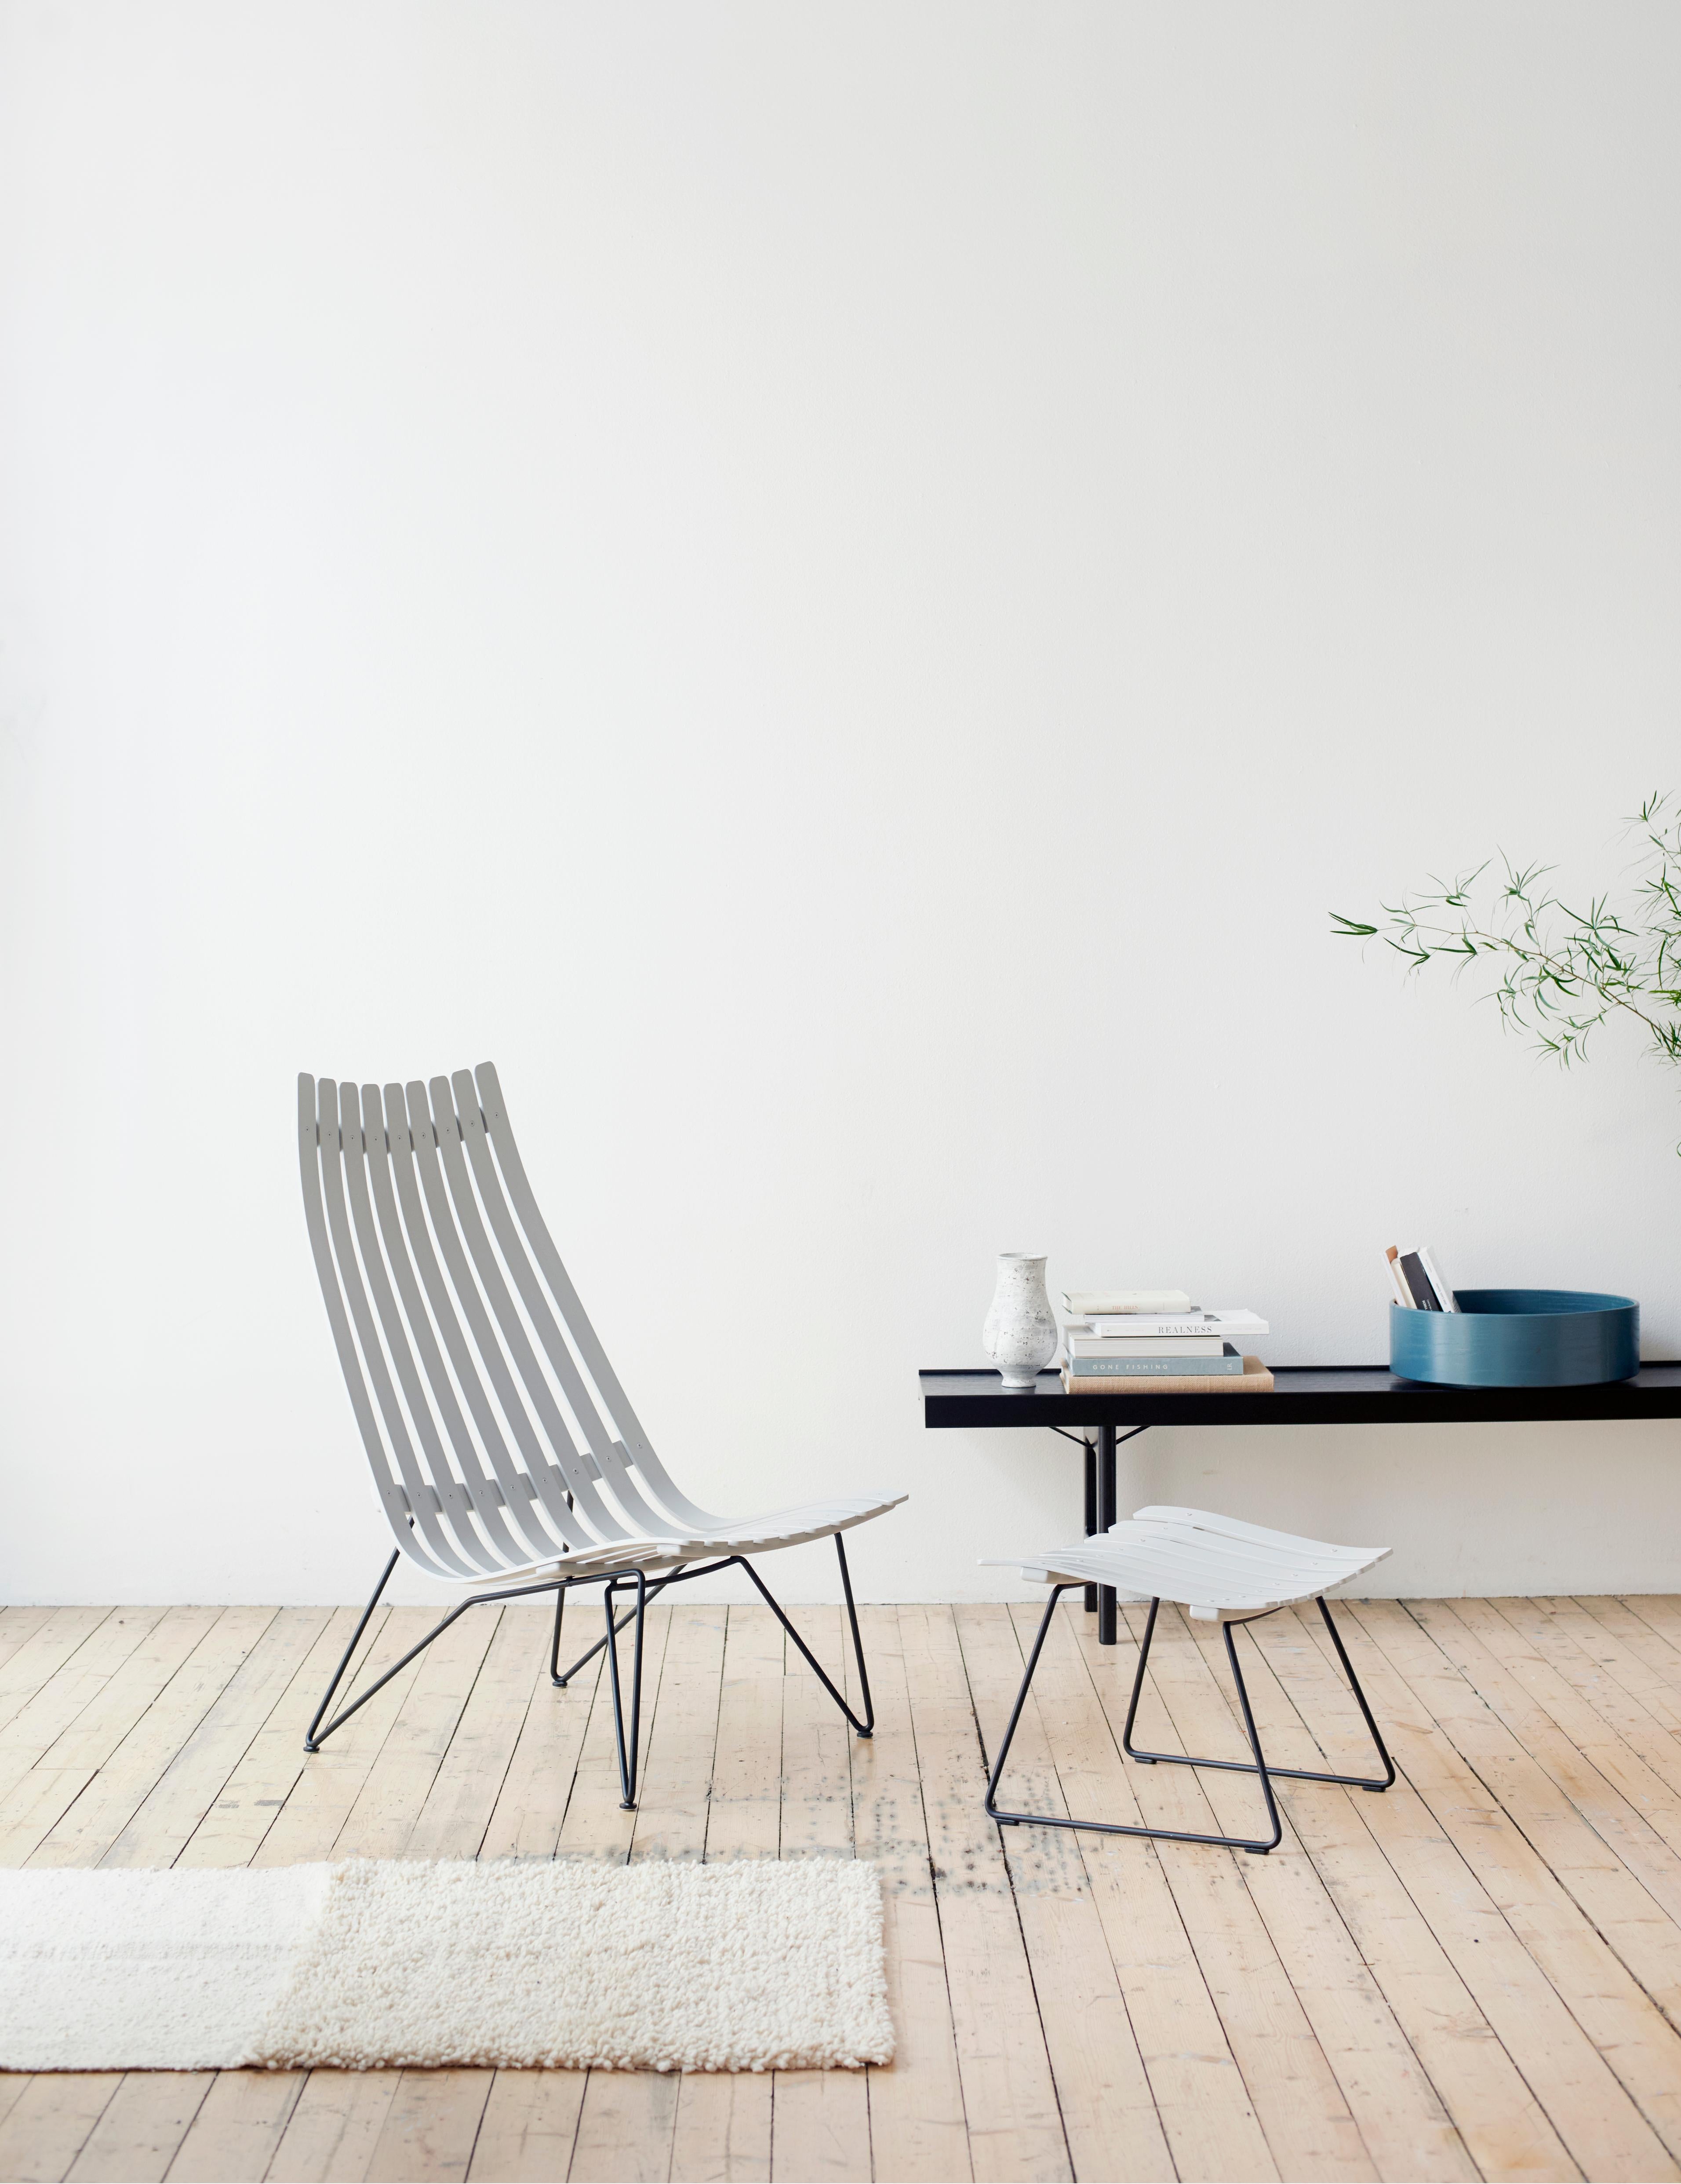 Scandia Senior Bolt lounge chair. New edition. Variation of the Scandia Nett armchair created in 1959 by designer Hans Brattrud and of the Scandia junior chair, the Scandia Senior swivel lounge armchair is characteristic of Scandinavian design with